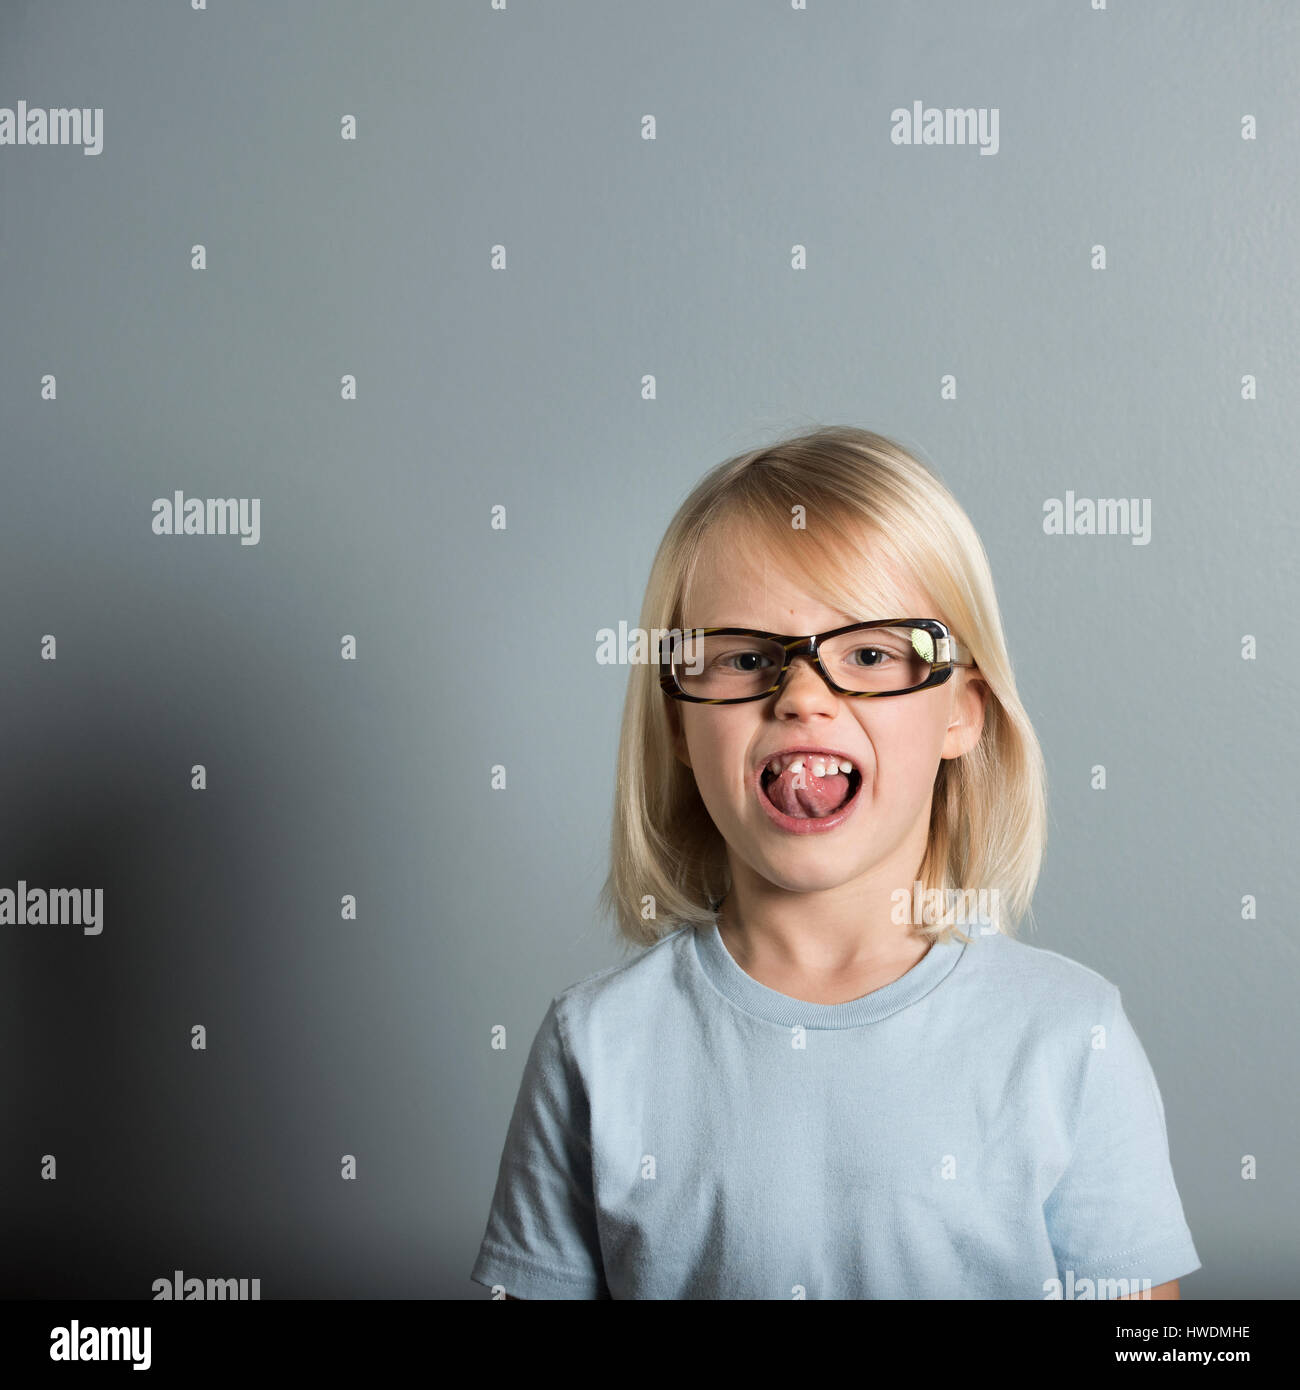 Portrait of boy wearing glasses sticking out tongue Stock Photo